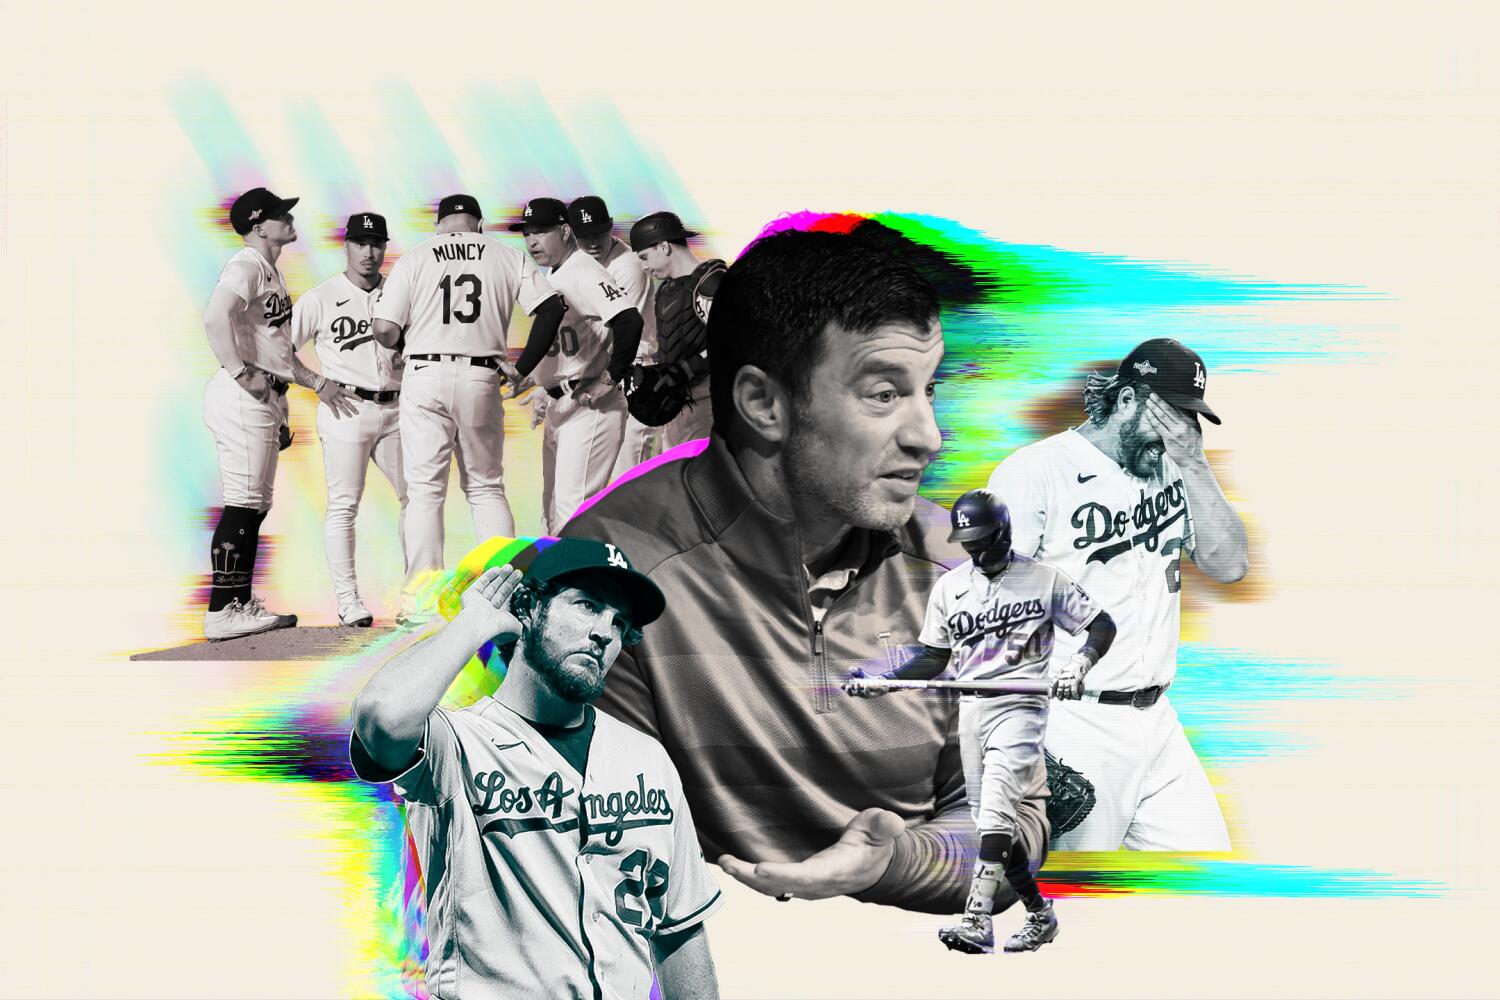 Dynasty derailed: Inside the October issues keeping the Dodgers from another World Series